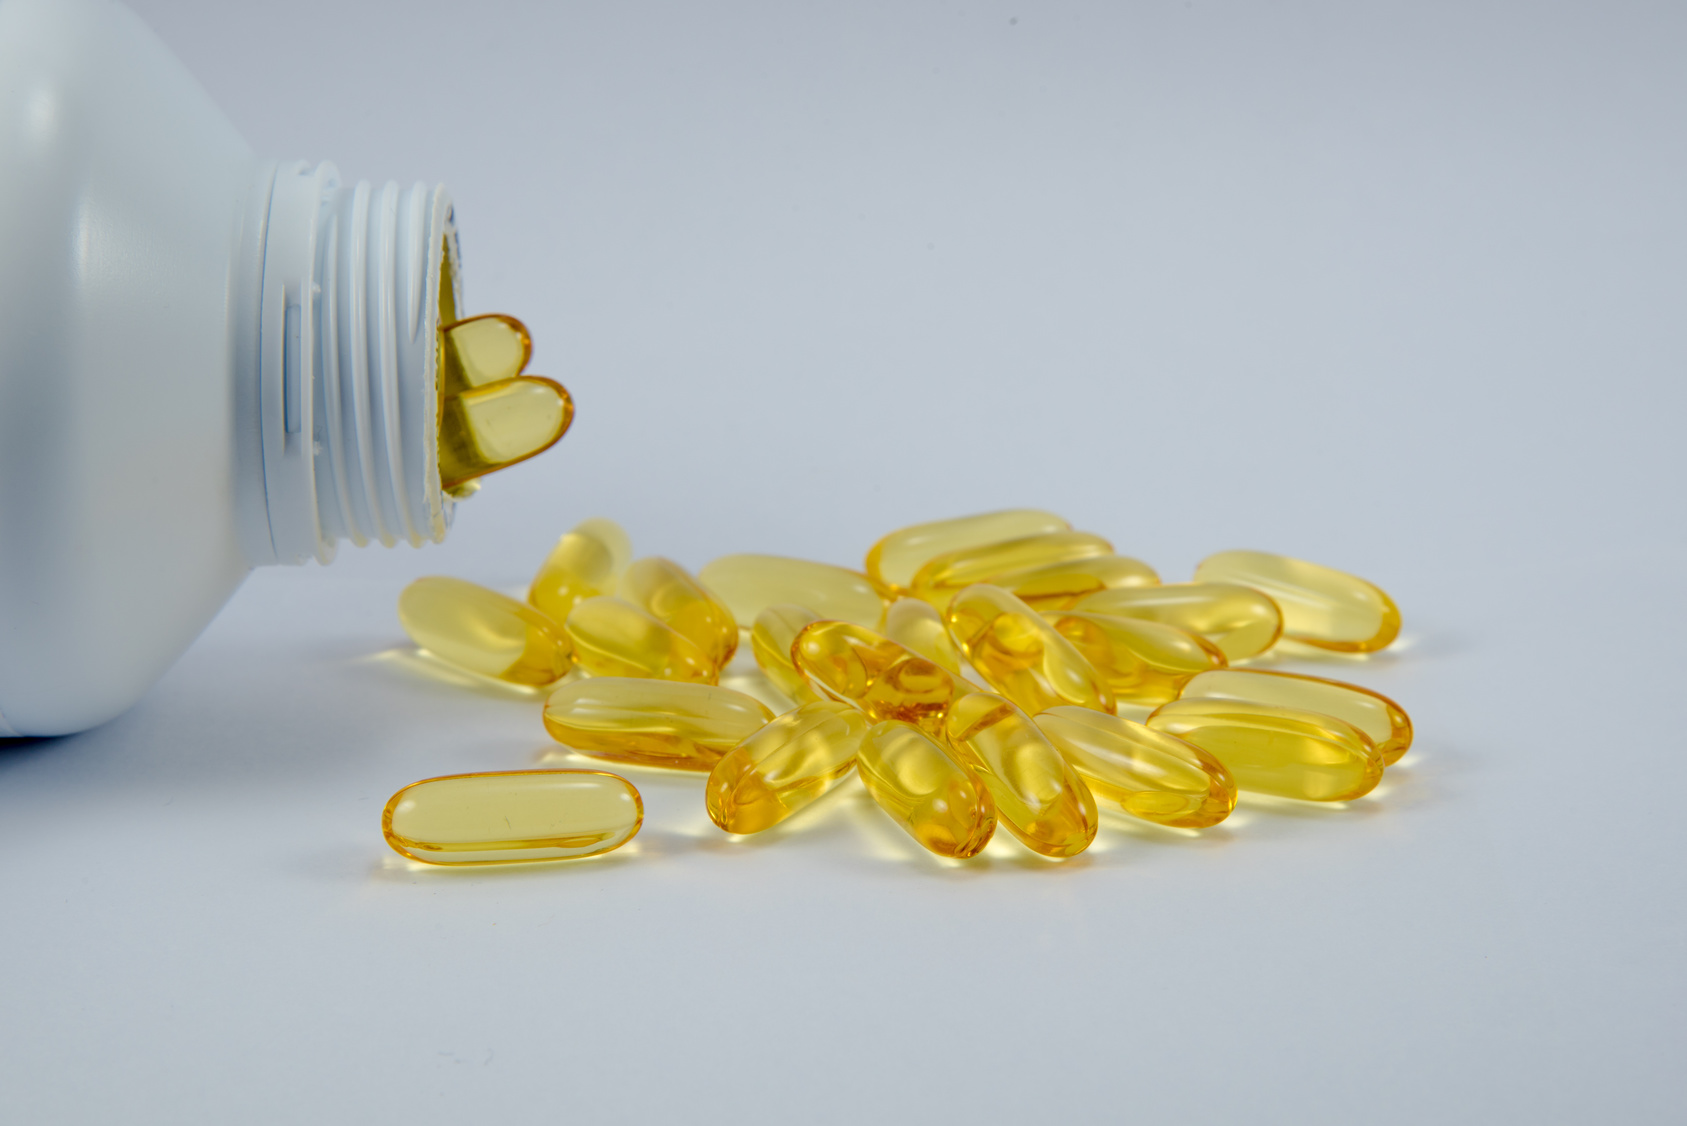 fishoil capsules from bottle in white background